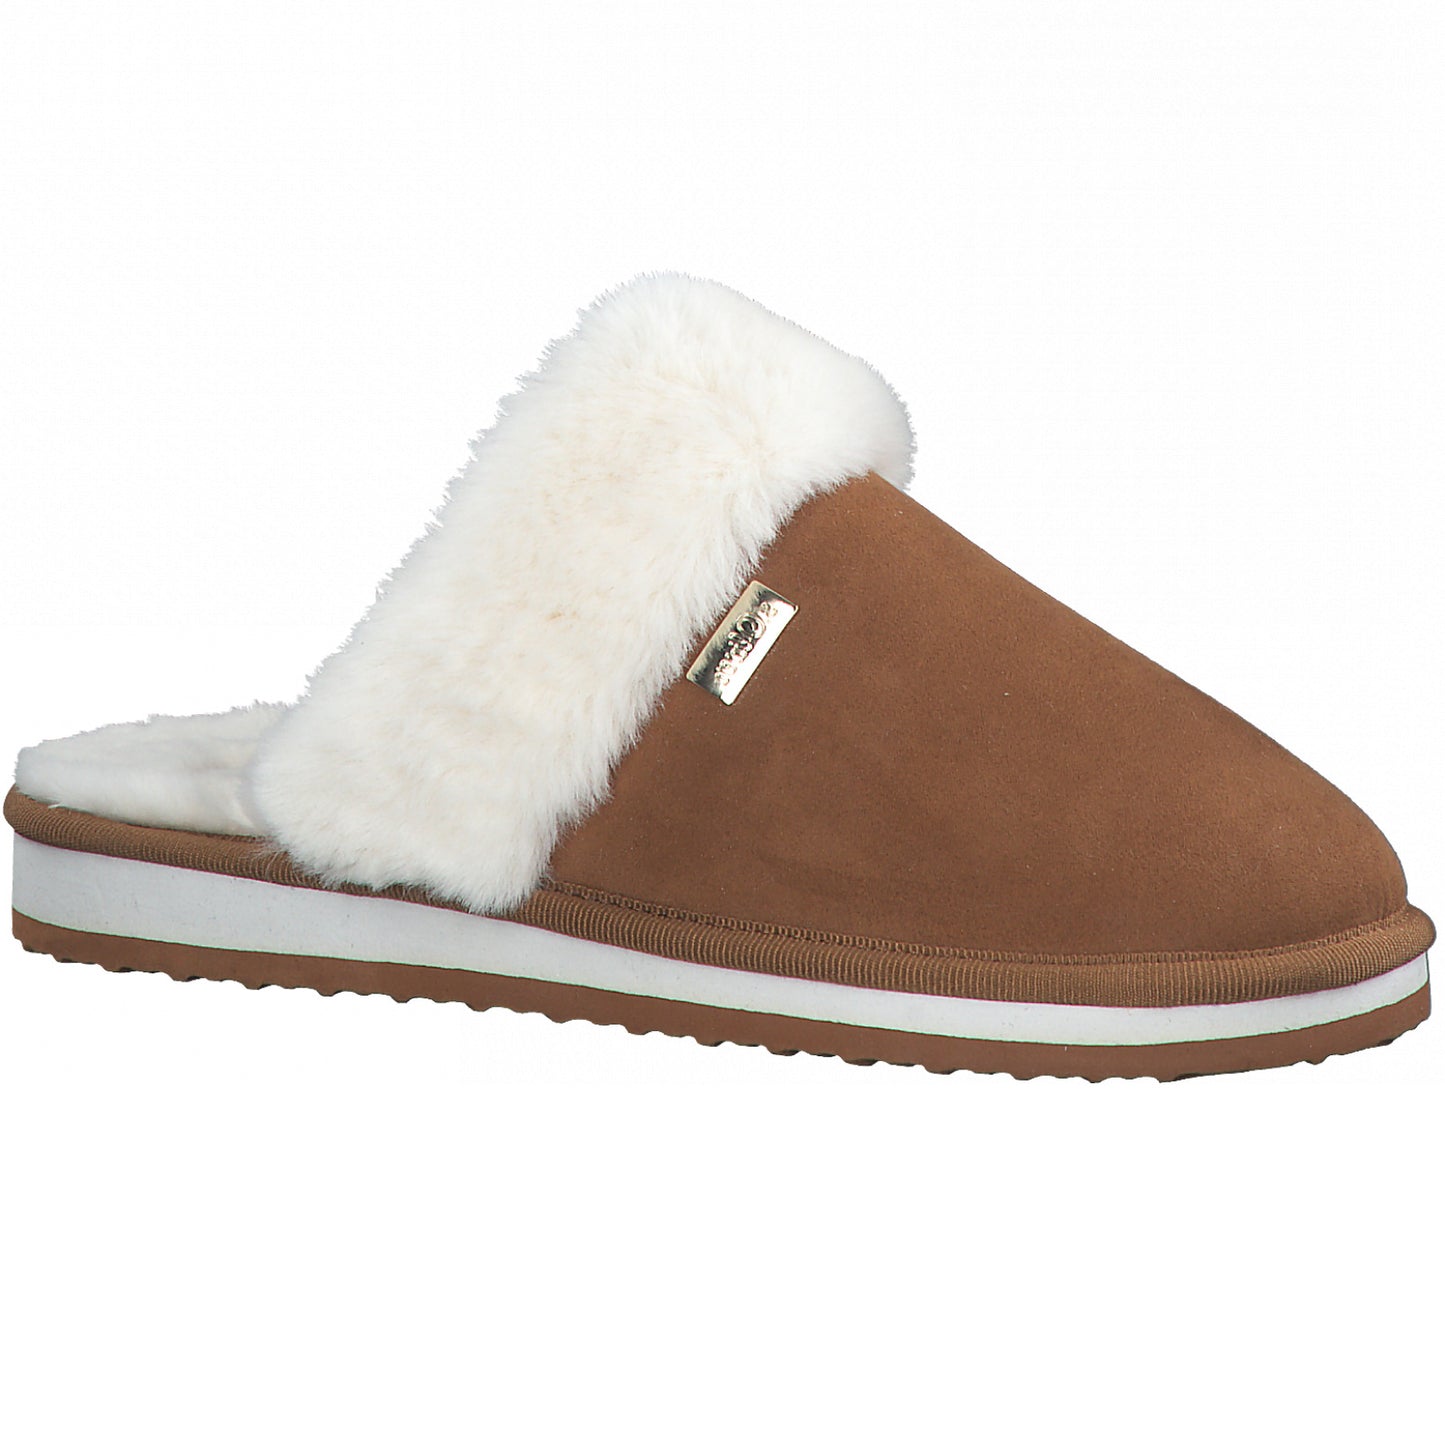 S Oliver 5-5-27101-37 440 Brown Slippers